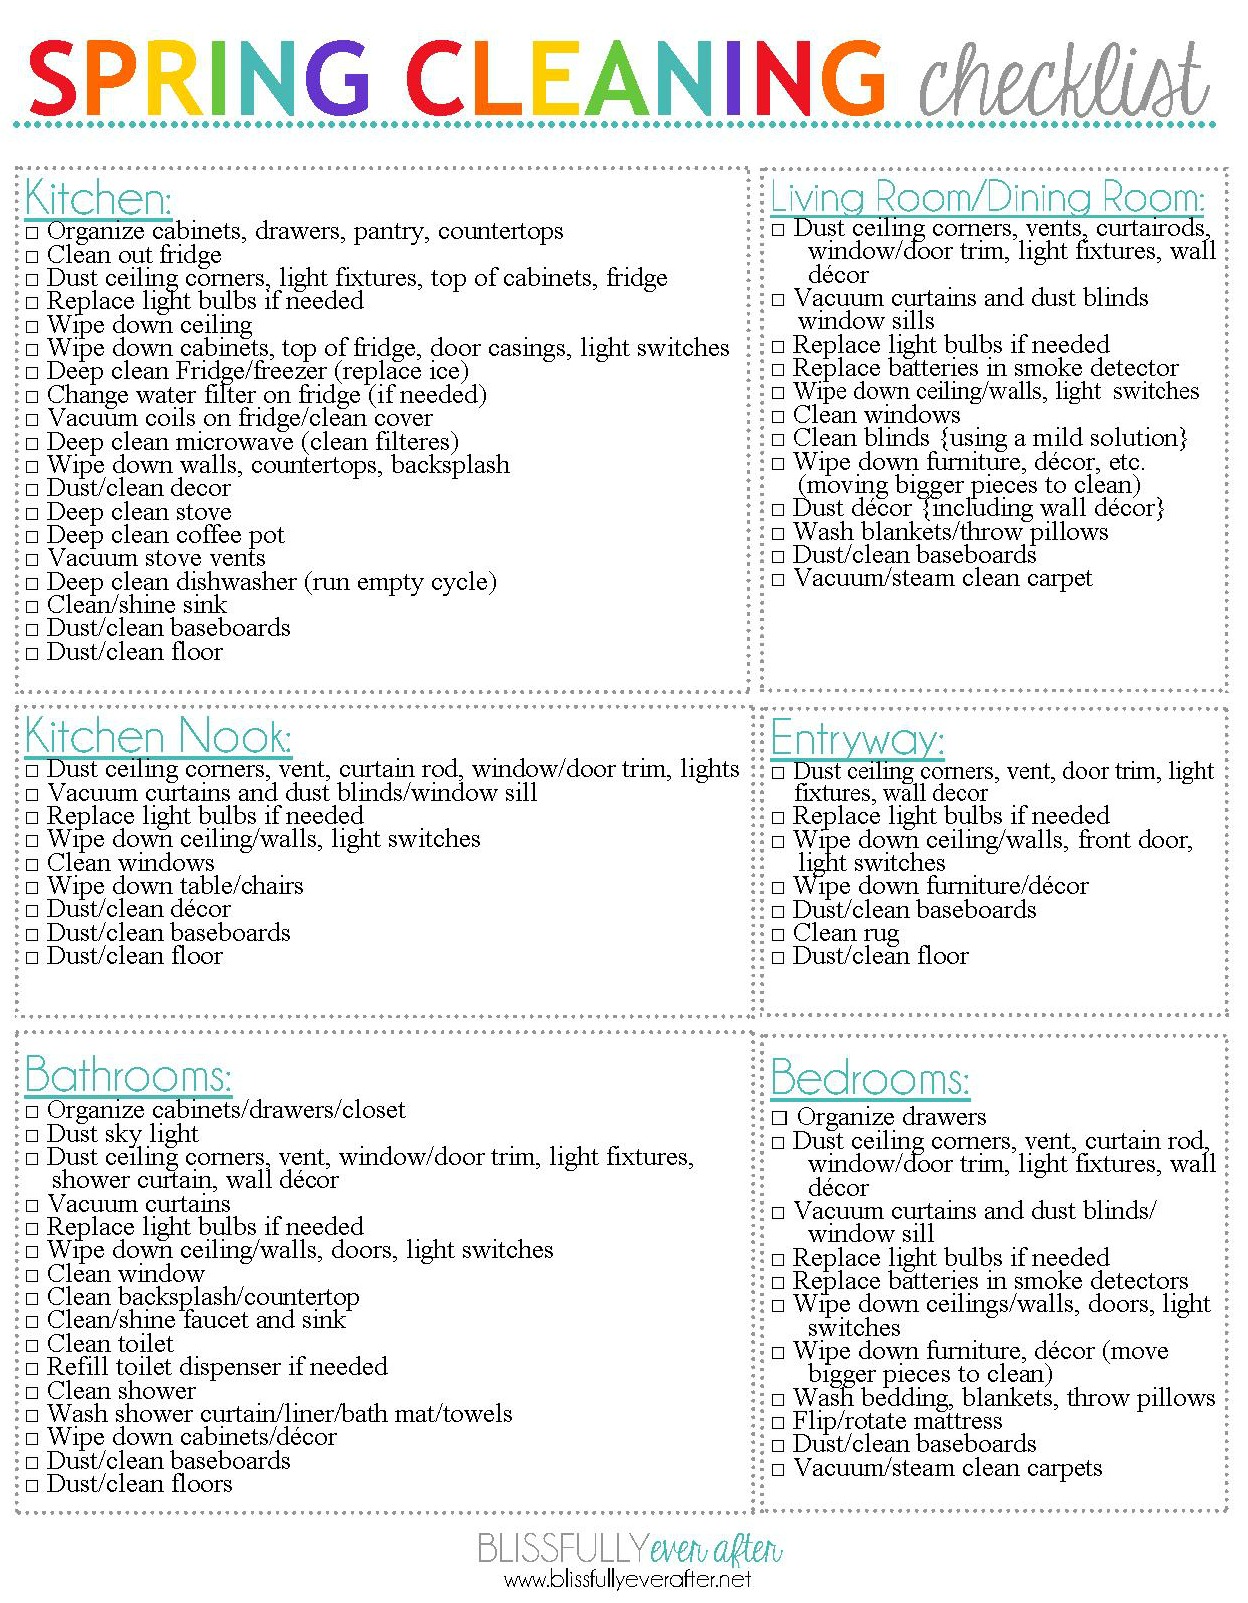 spring-cleaning-checklist-free-spring-cceaning-checklist-printable